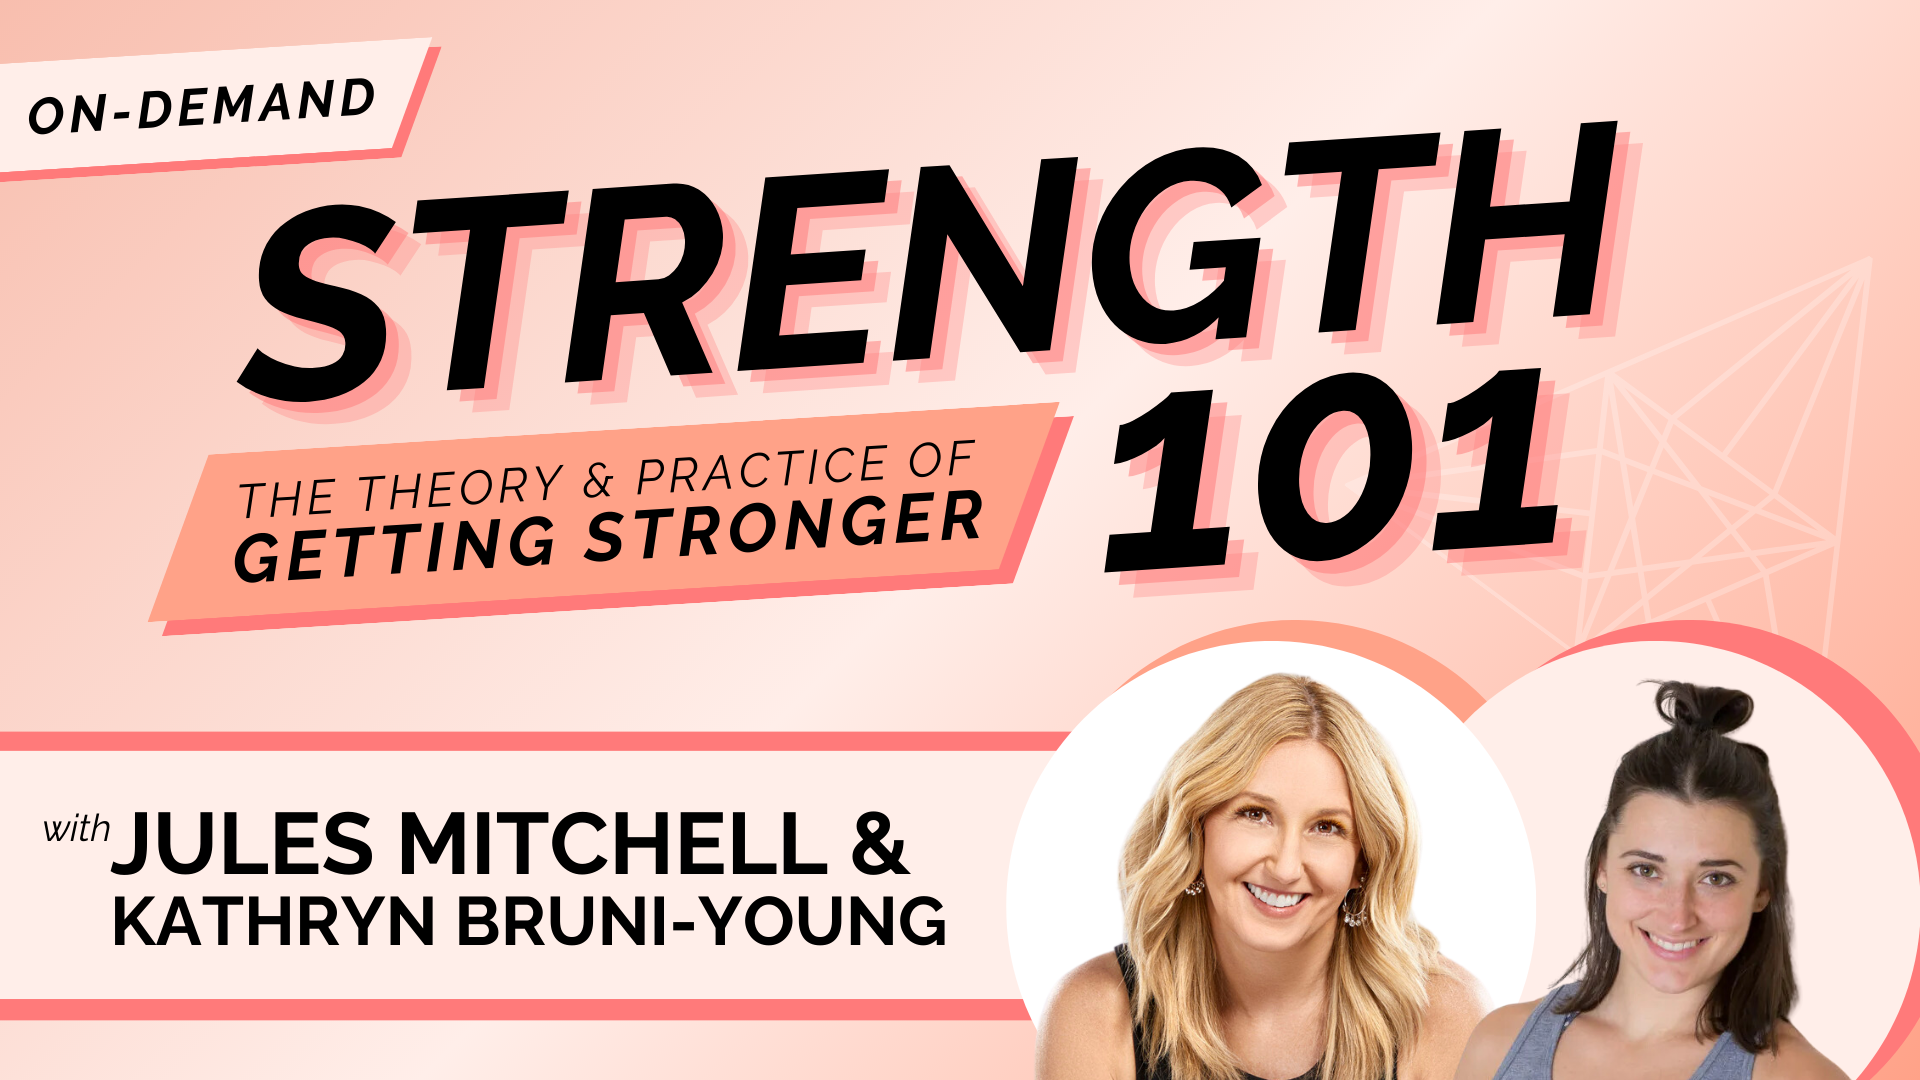 Strength 101: The Theory & Practice of Getting Stronger, with Jules Mitchell & Kathryn Bruni-Young